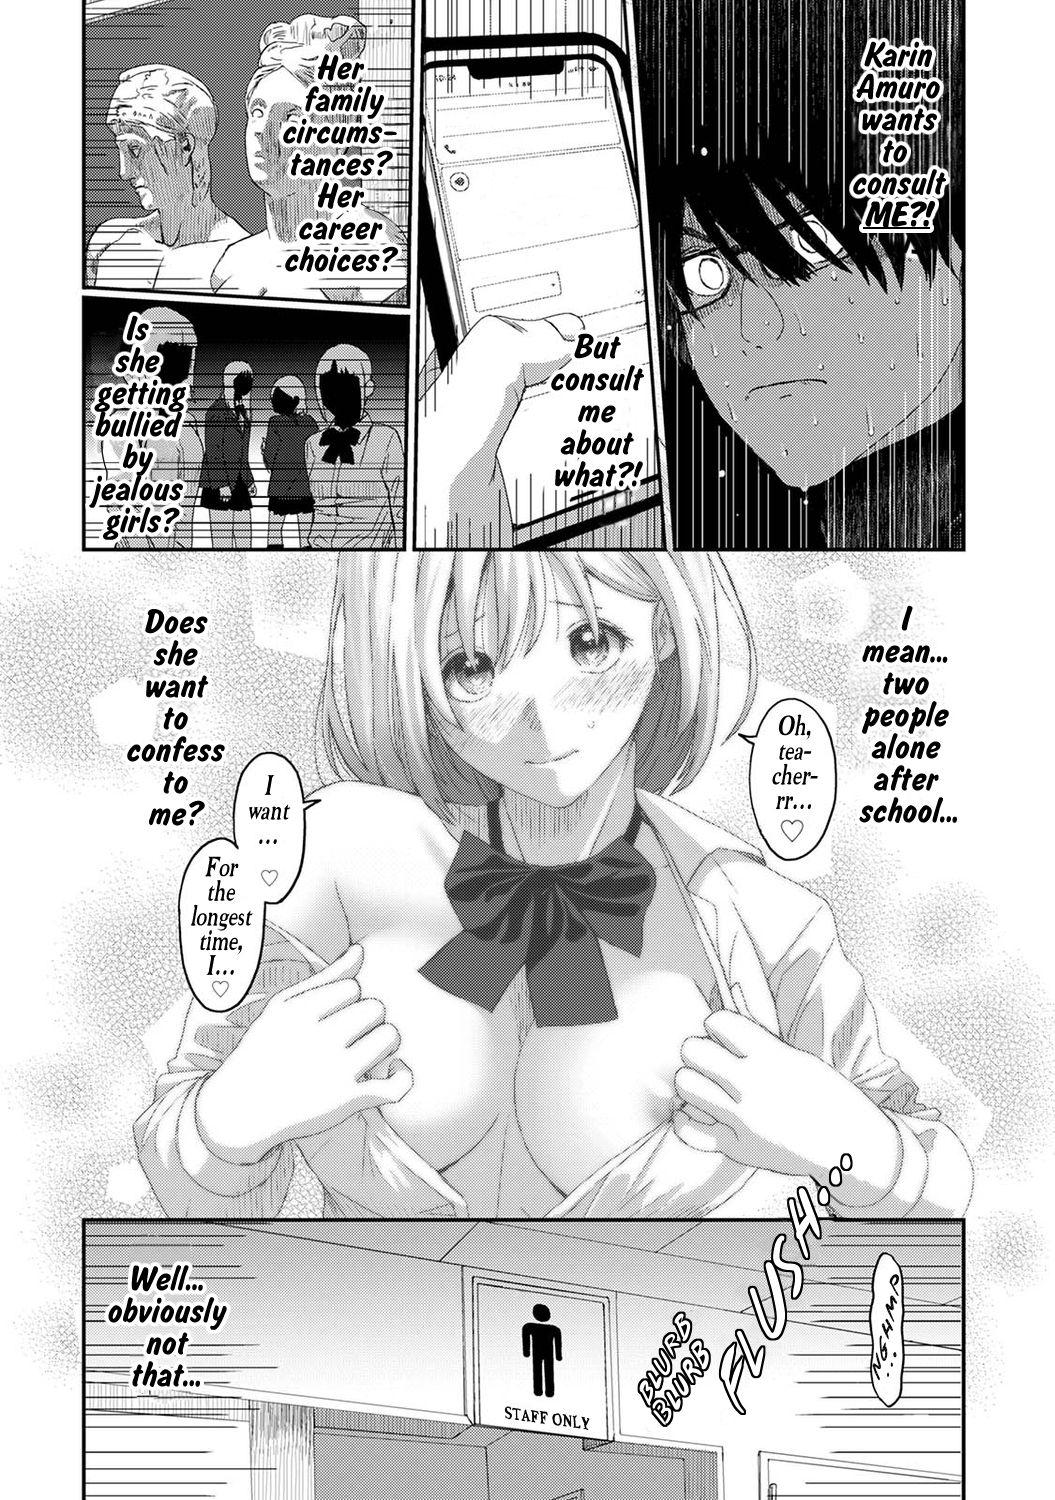 Russian Itaiamai - Chapter 1 Twink - Page 10